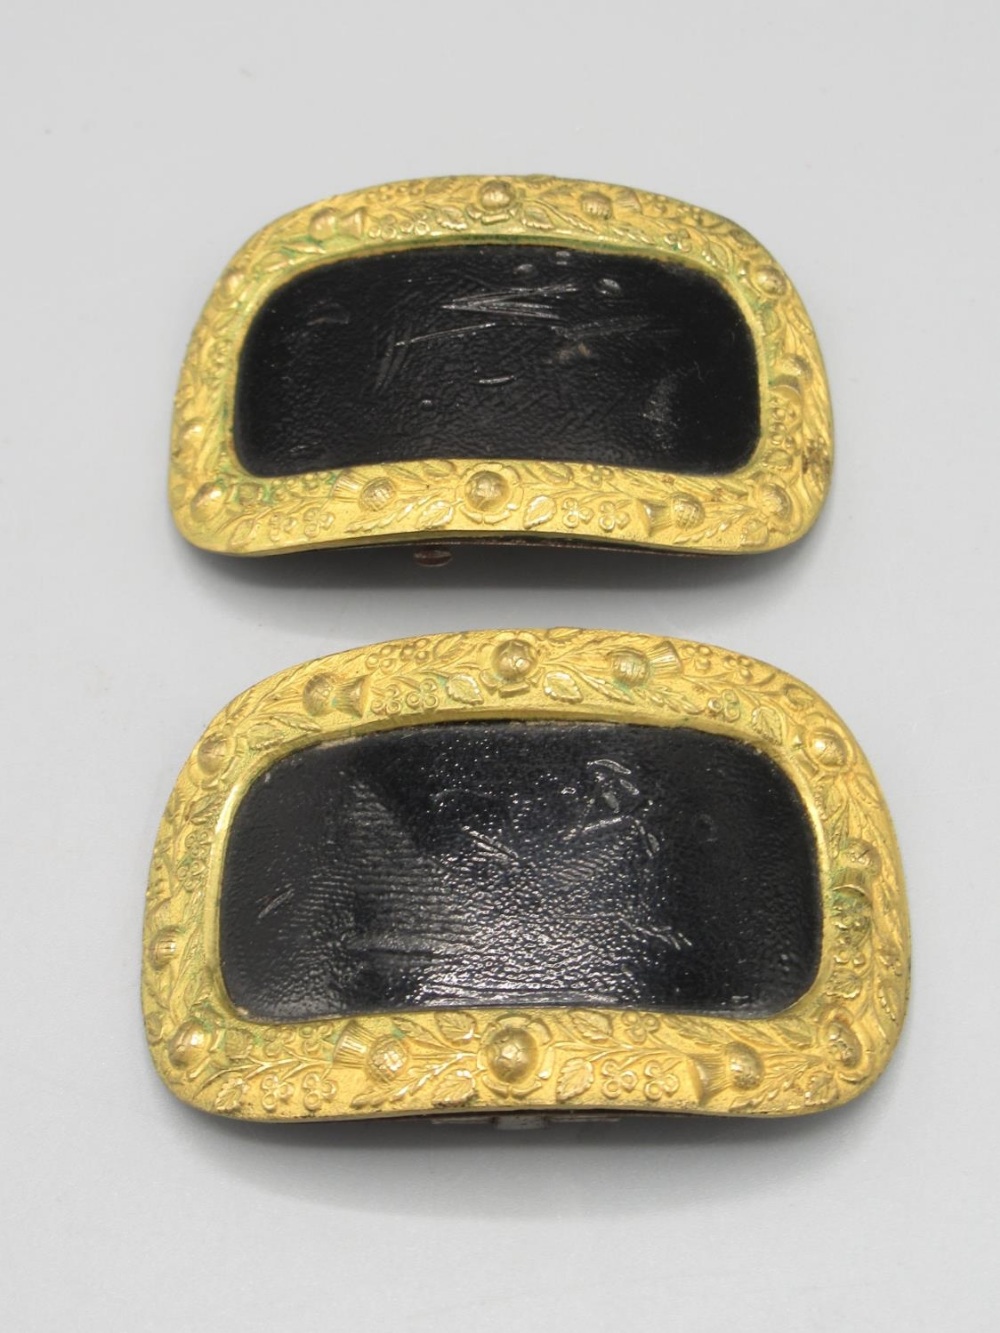 Pair of 19th century gilt metal dress shoe buckles decorated in relief with roses, thistles and